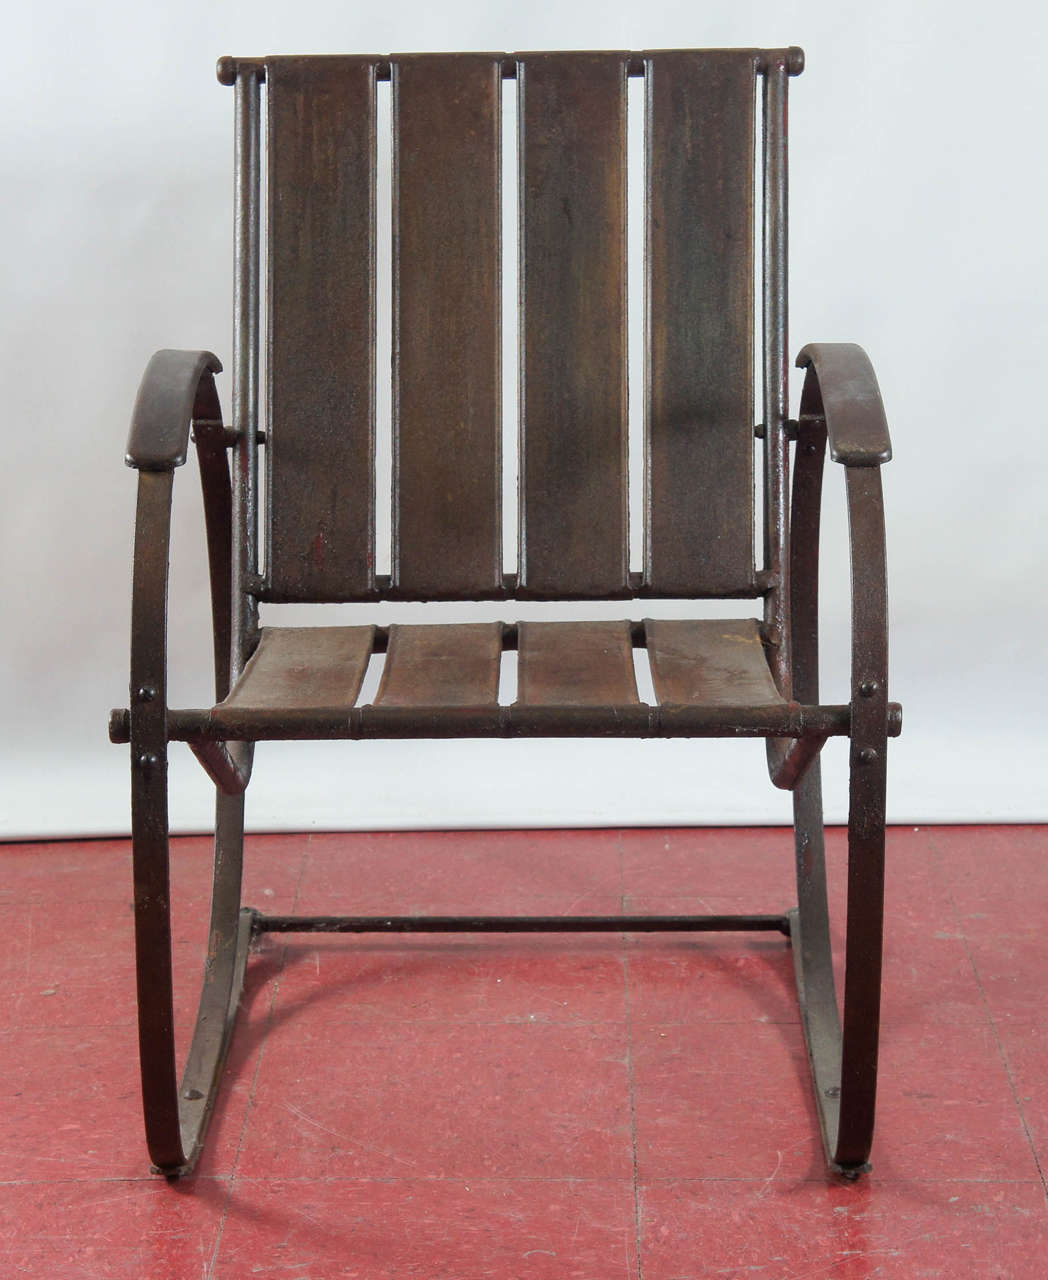 Sturdily constructed slatted iron garden chair has circular arms attached to stand-like base that can create a rocking motion for the sitter.

Arm height: 23.50